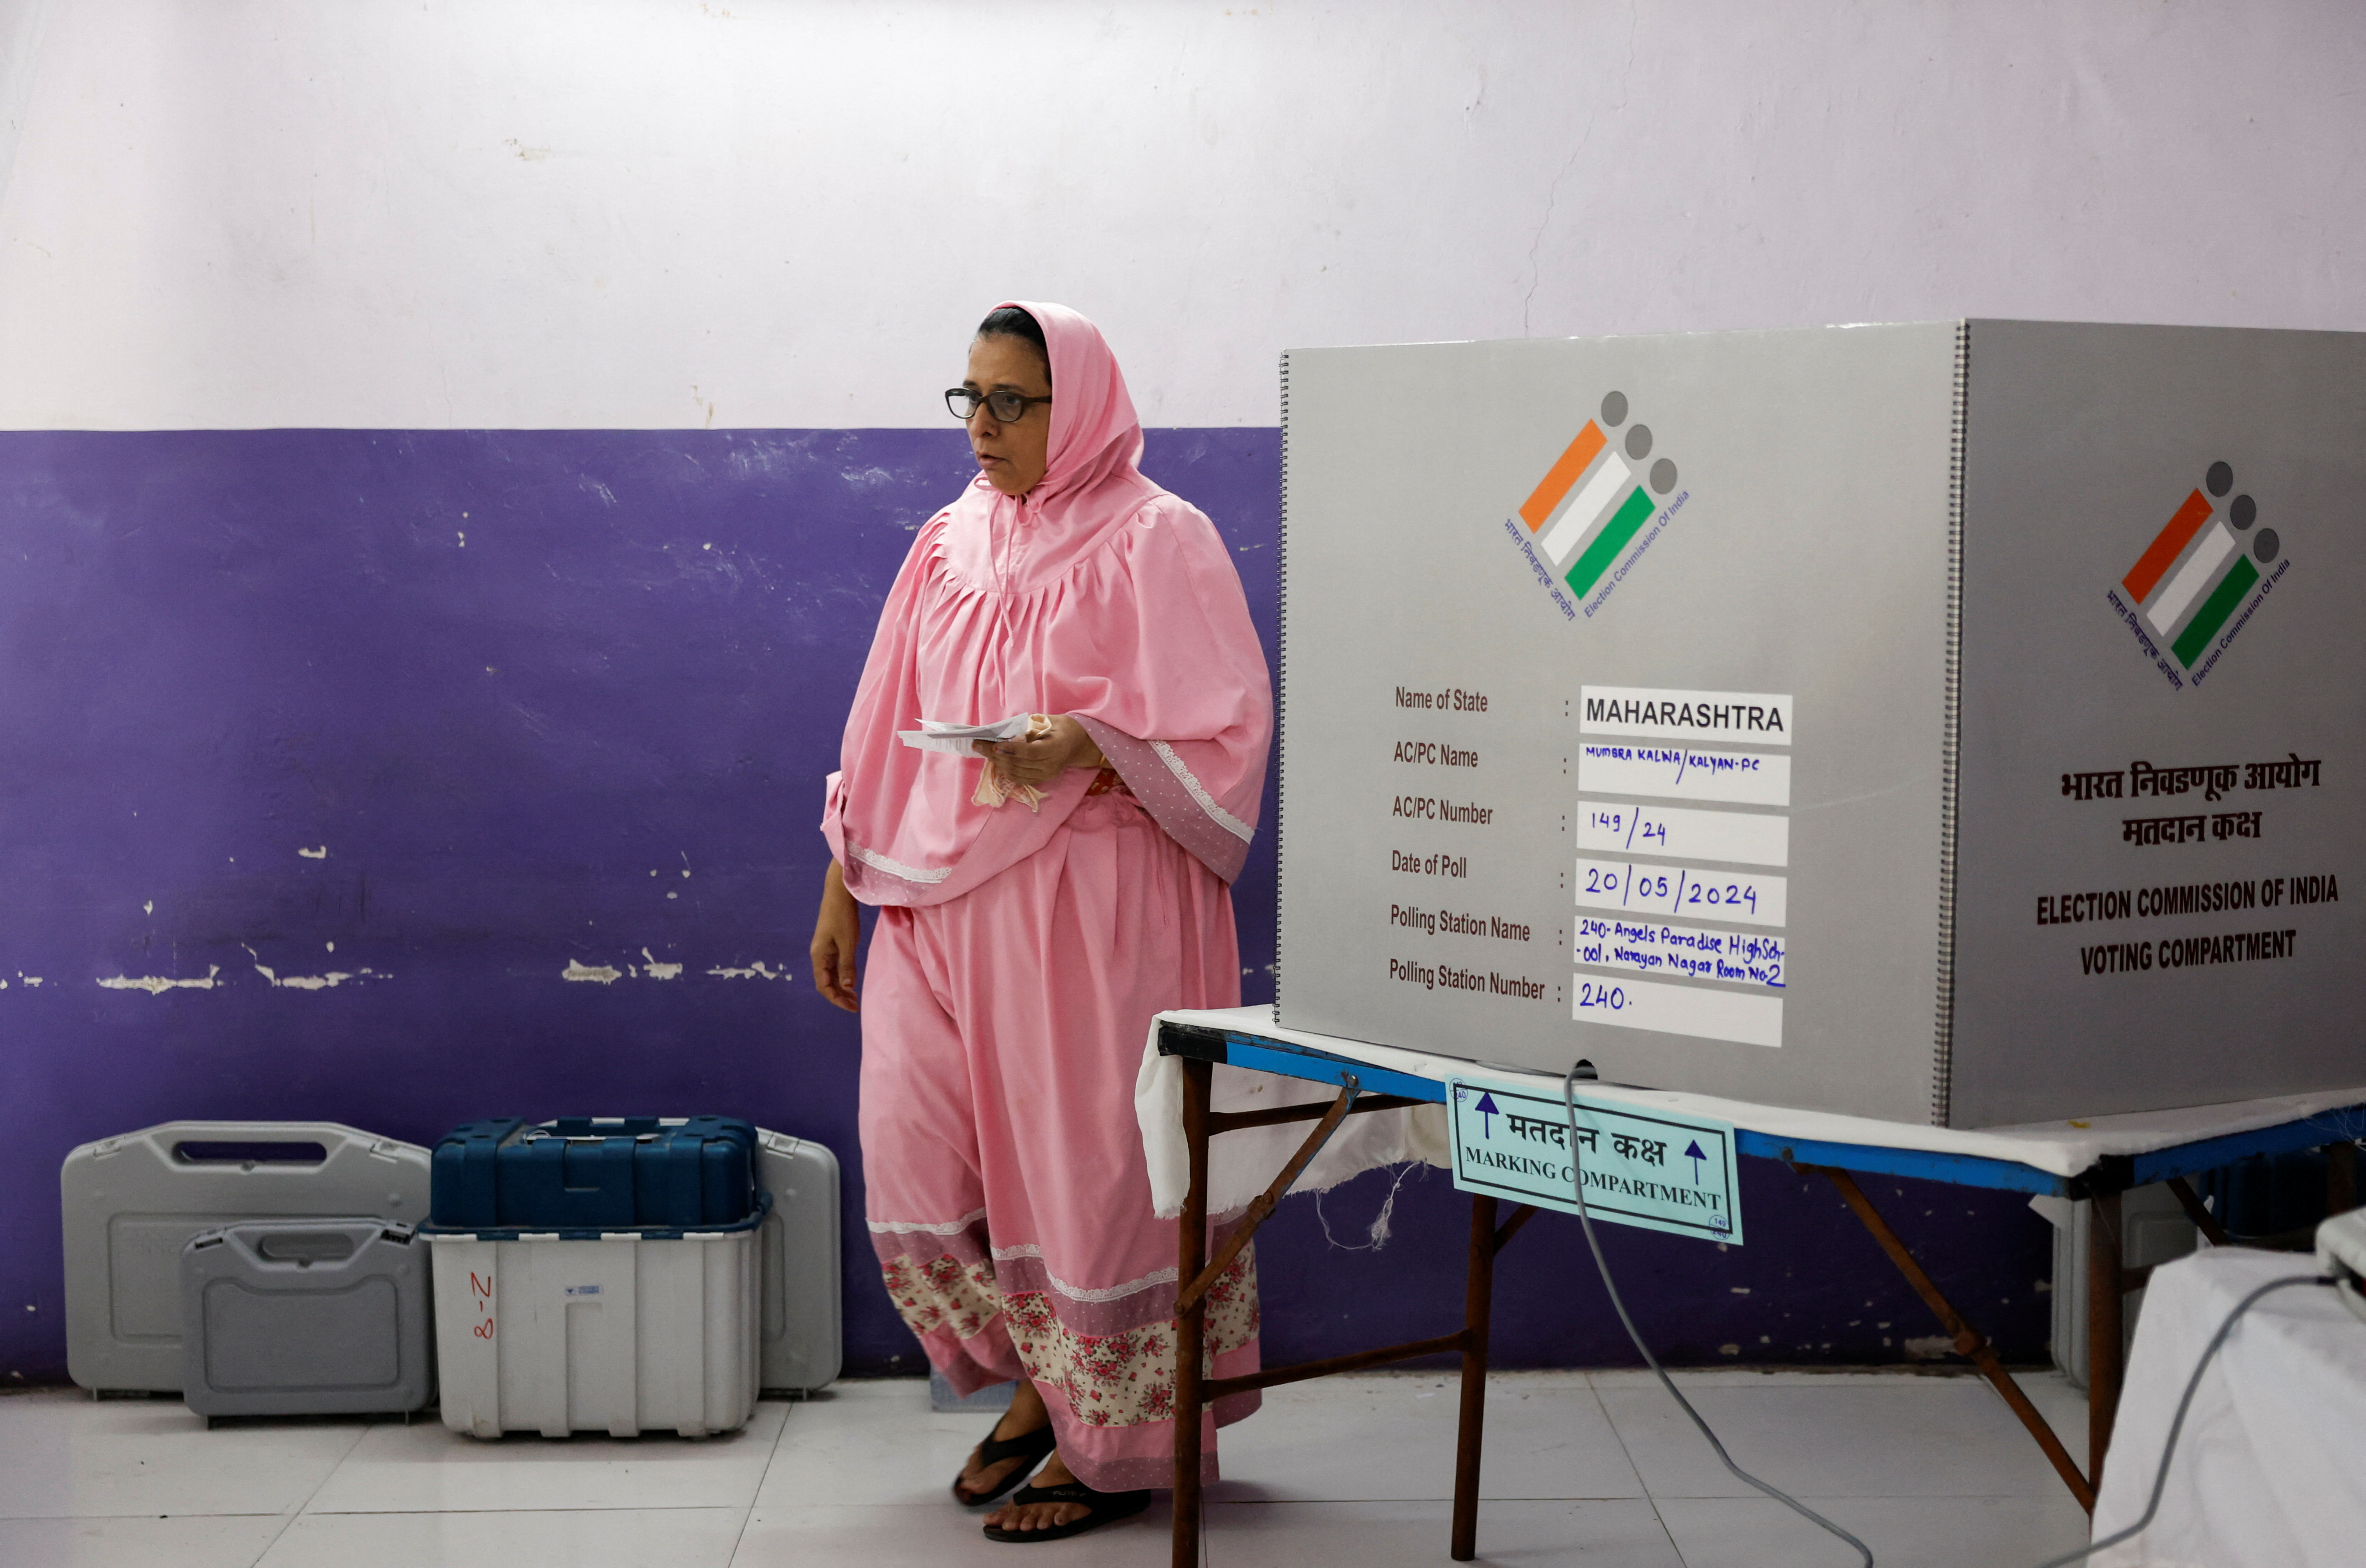 A woman leaves after casting her vote at a polling booth during the fifth phase of India's general election, in Mumbra